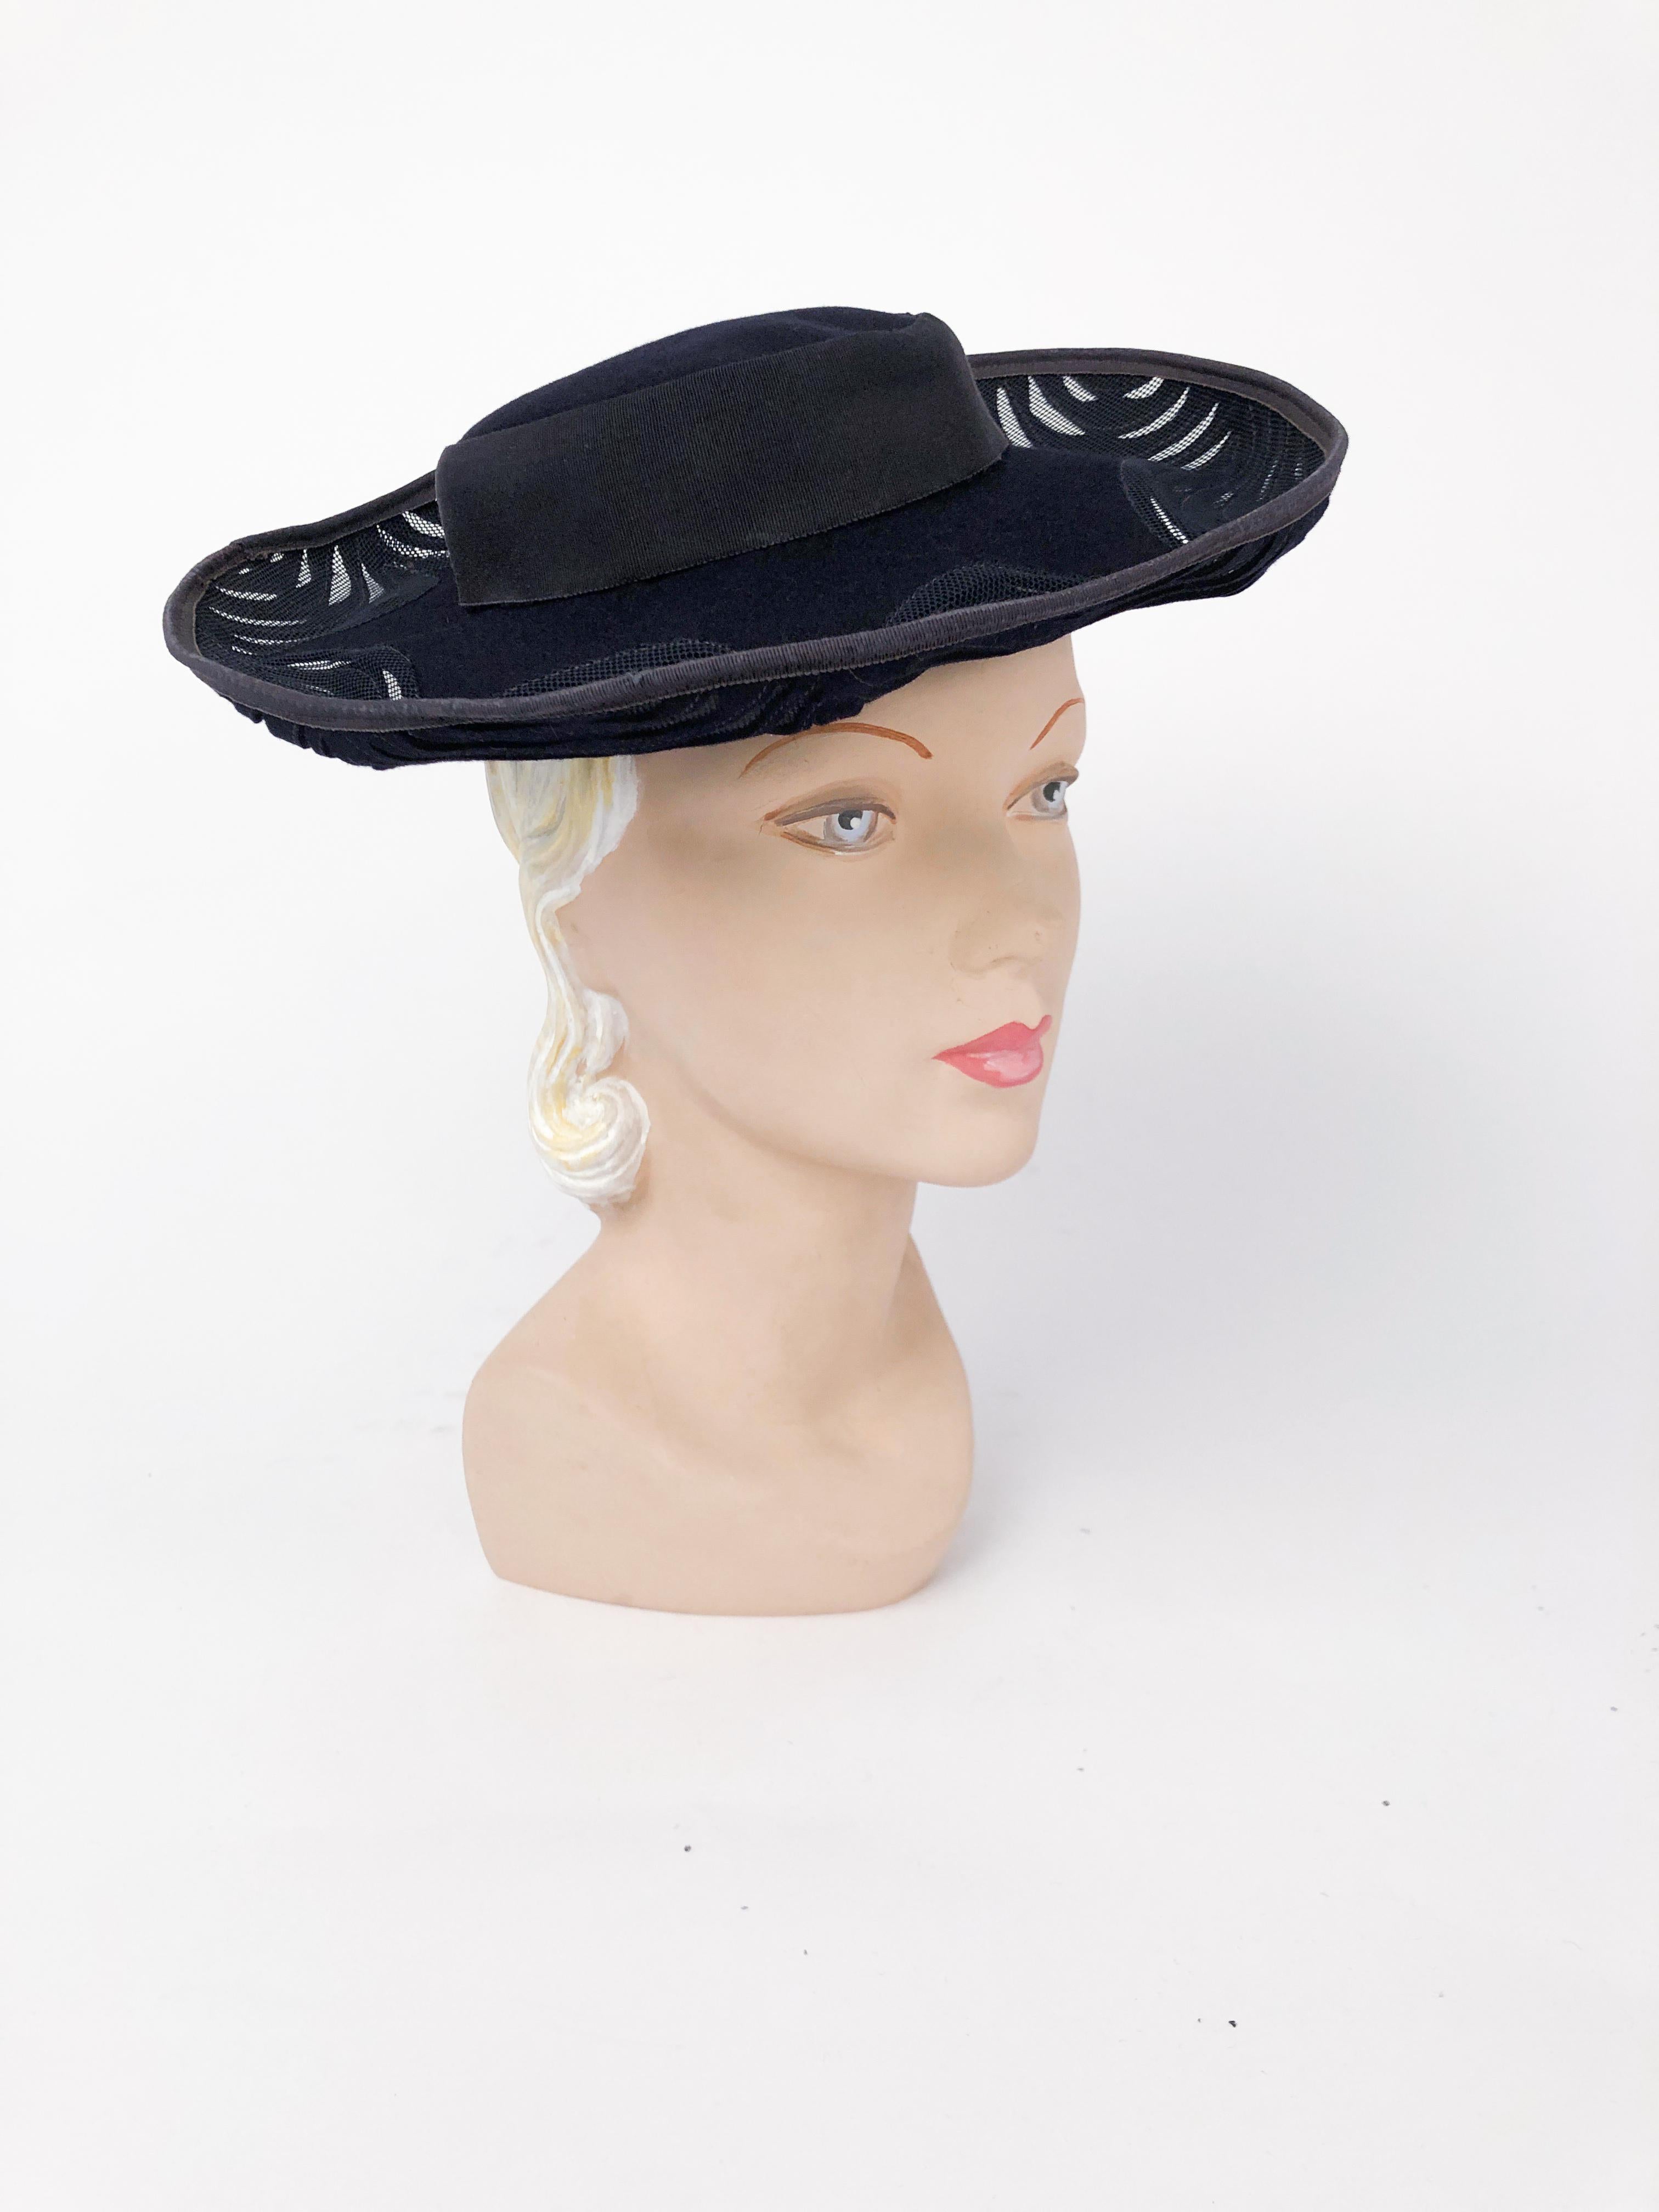 1940s Navy Felt Hat with Hand Cut Pattern and Netting. Navy blue fur felt hand cut pattern with shallow crown, wide brim, grosgrain trim and matching net.